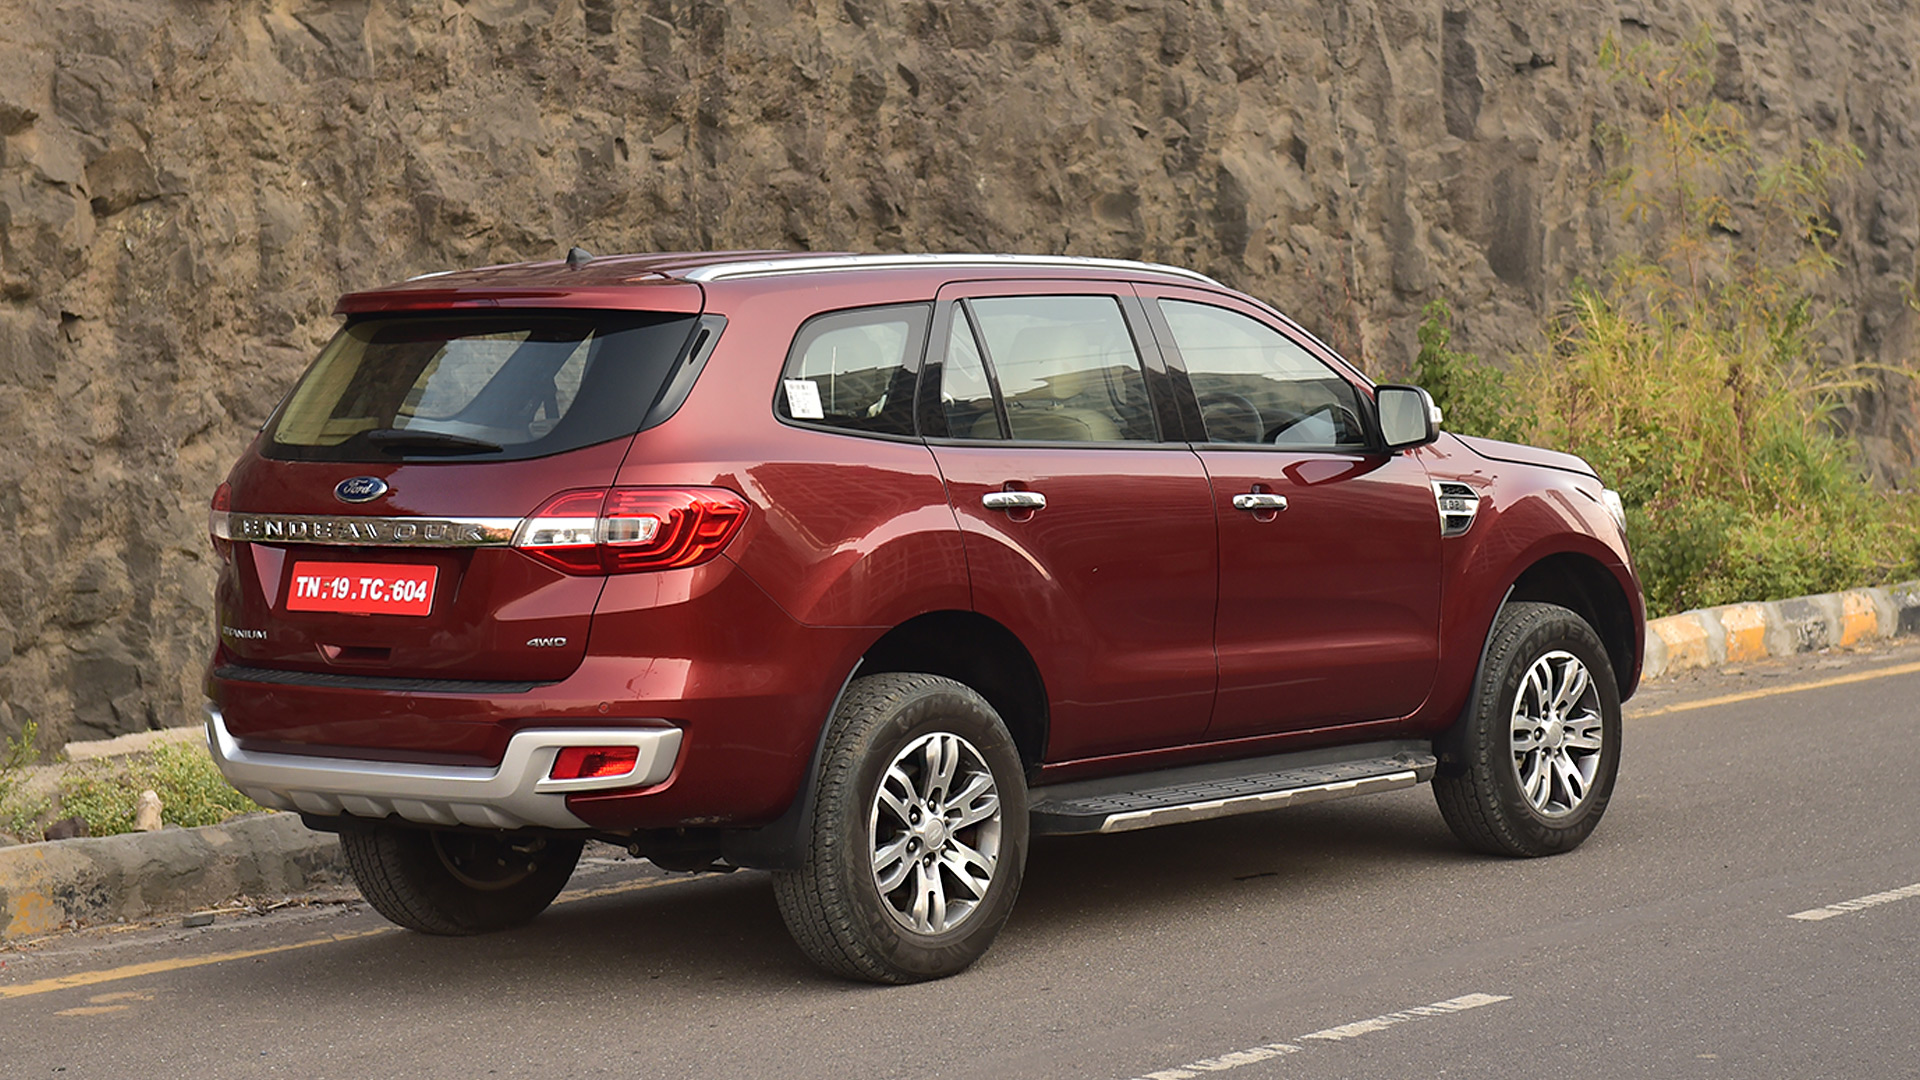 Ford Endeavour 2016 - Price, Mileage, Reviews ...
